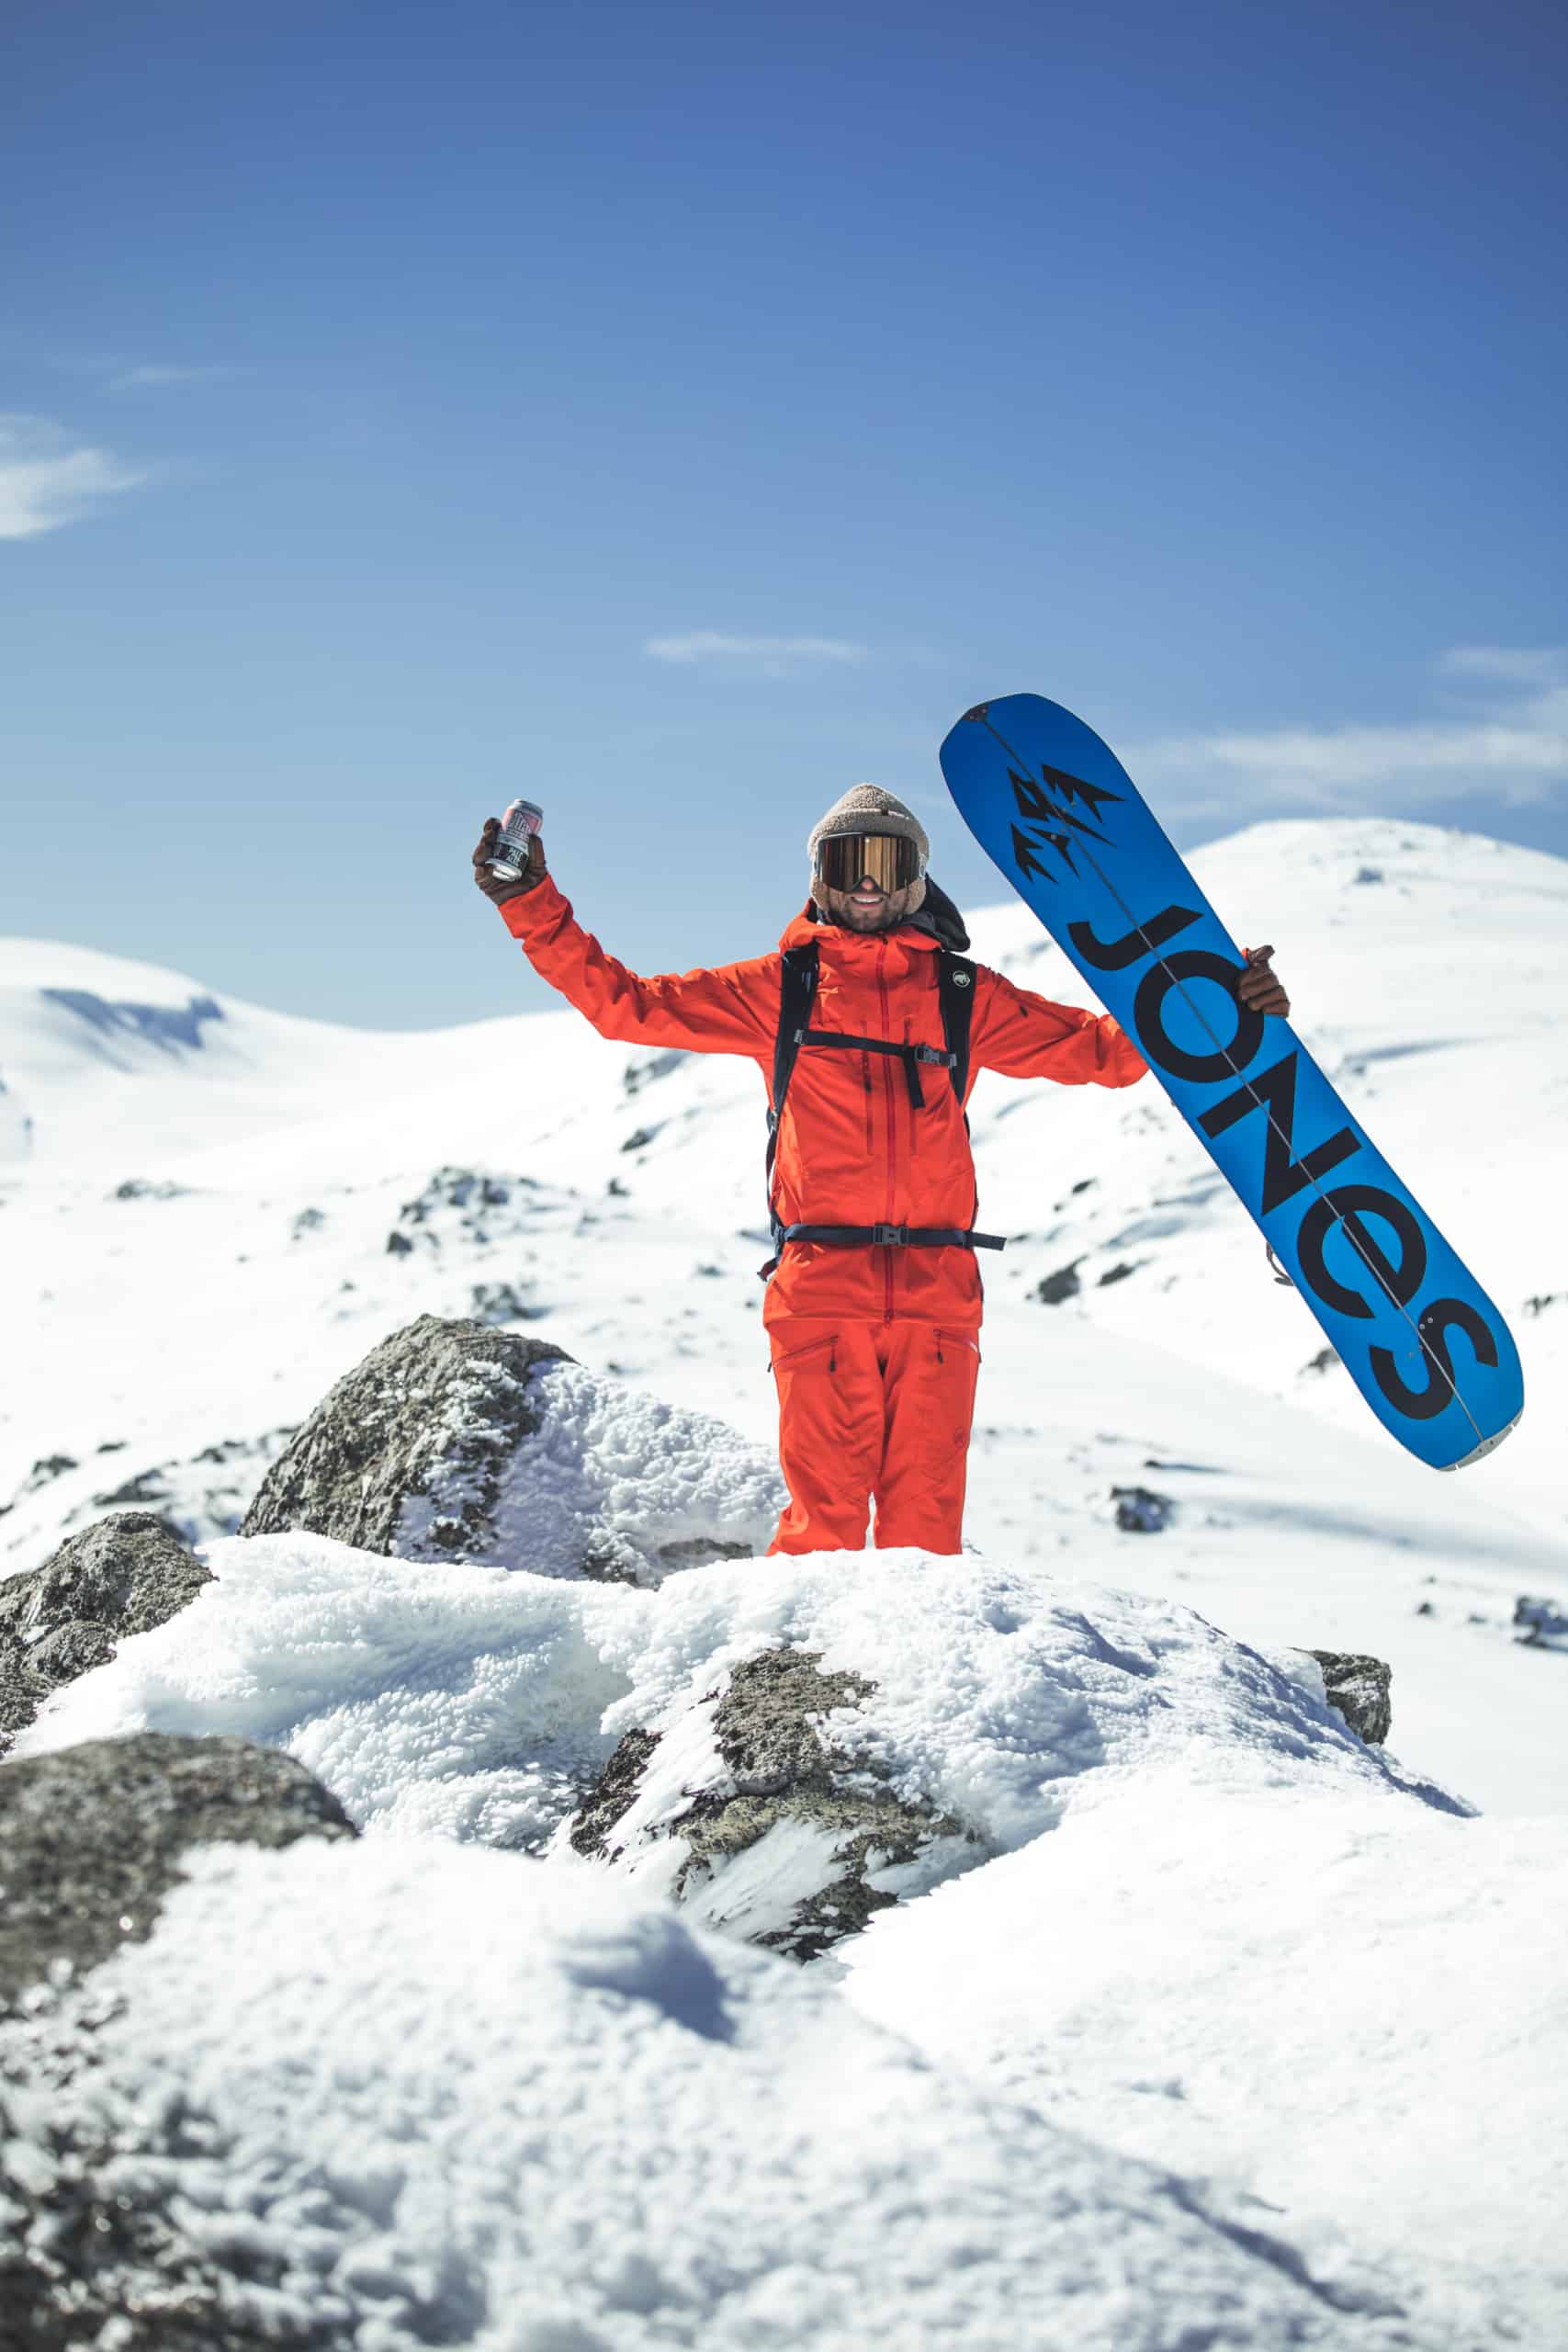 Gear Guide - Splitboards: The Boards to Take You Into The Backcountry ...